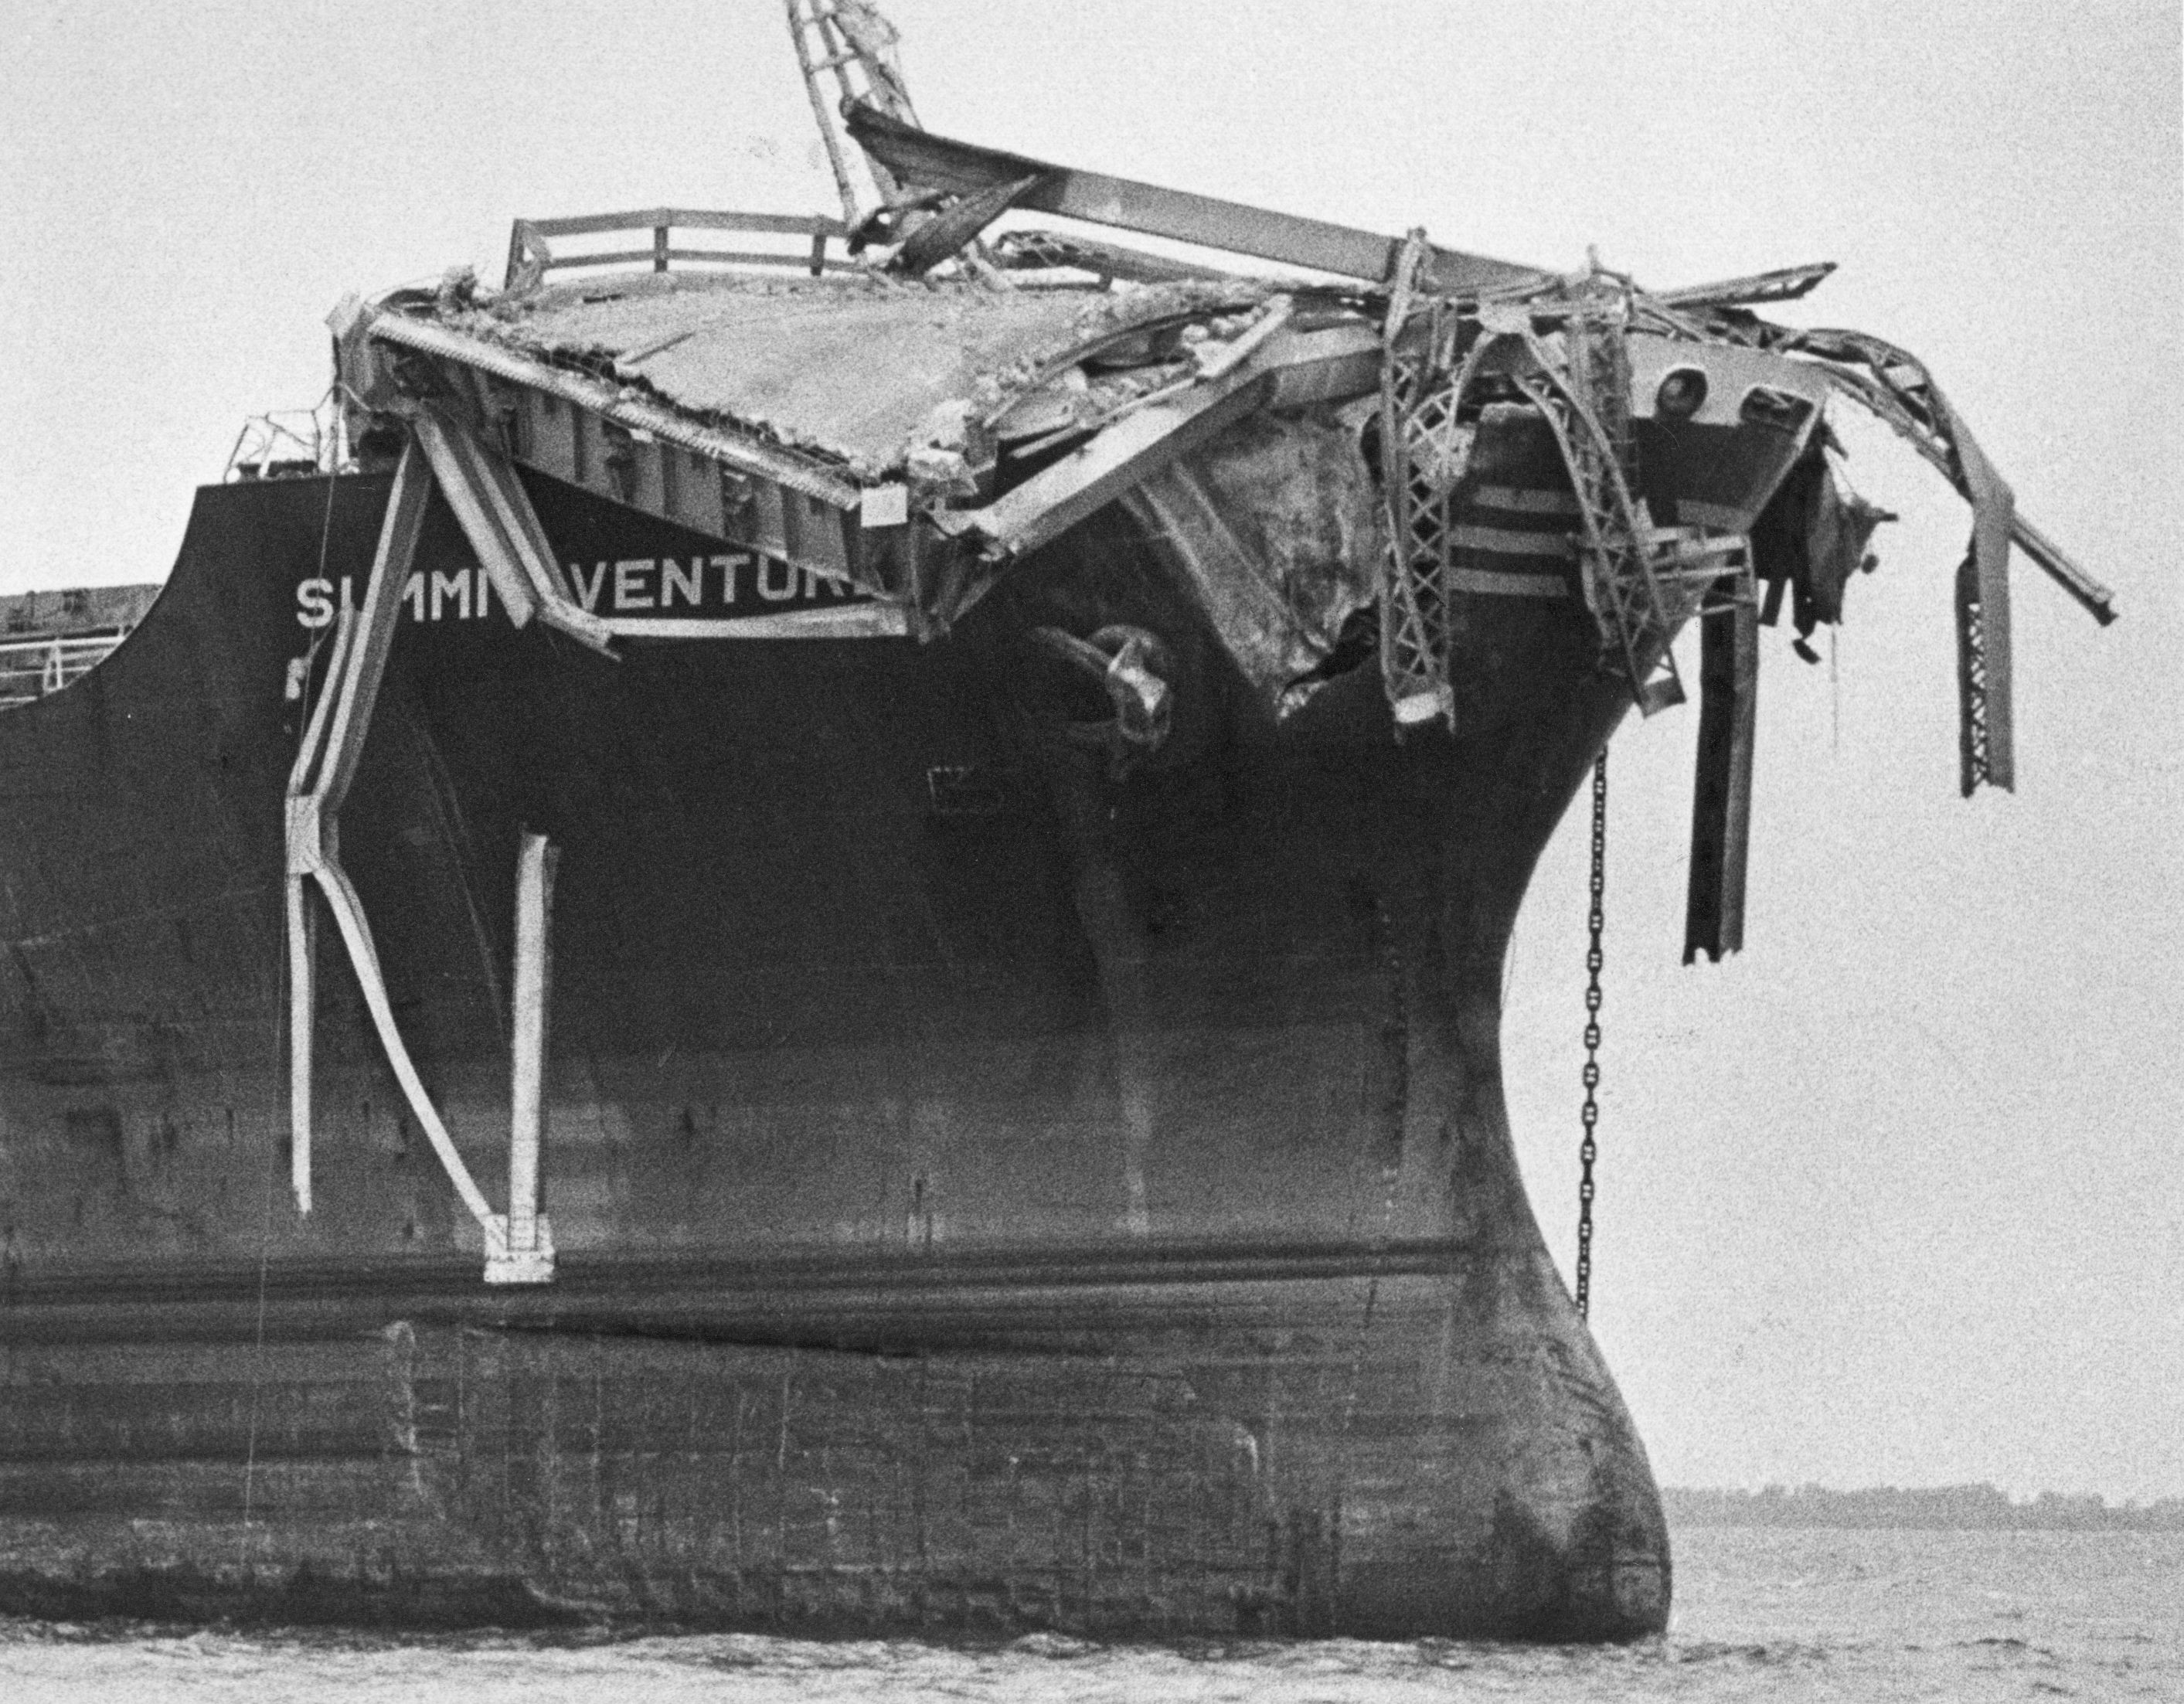 9th May 1980: Debris from the Sunshine Skyway Bridge perched on the bow of the freighter 'Summit Venture' after the vessel rammed the bridge during a thunderstorm at Tampa Bay, Florida (Photo by Keystone/Getty Images) (Keystone&mdash;Getty Images)